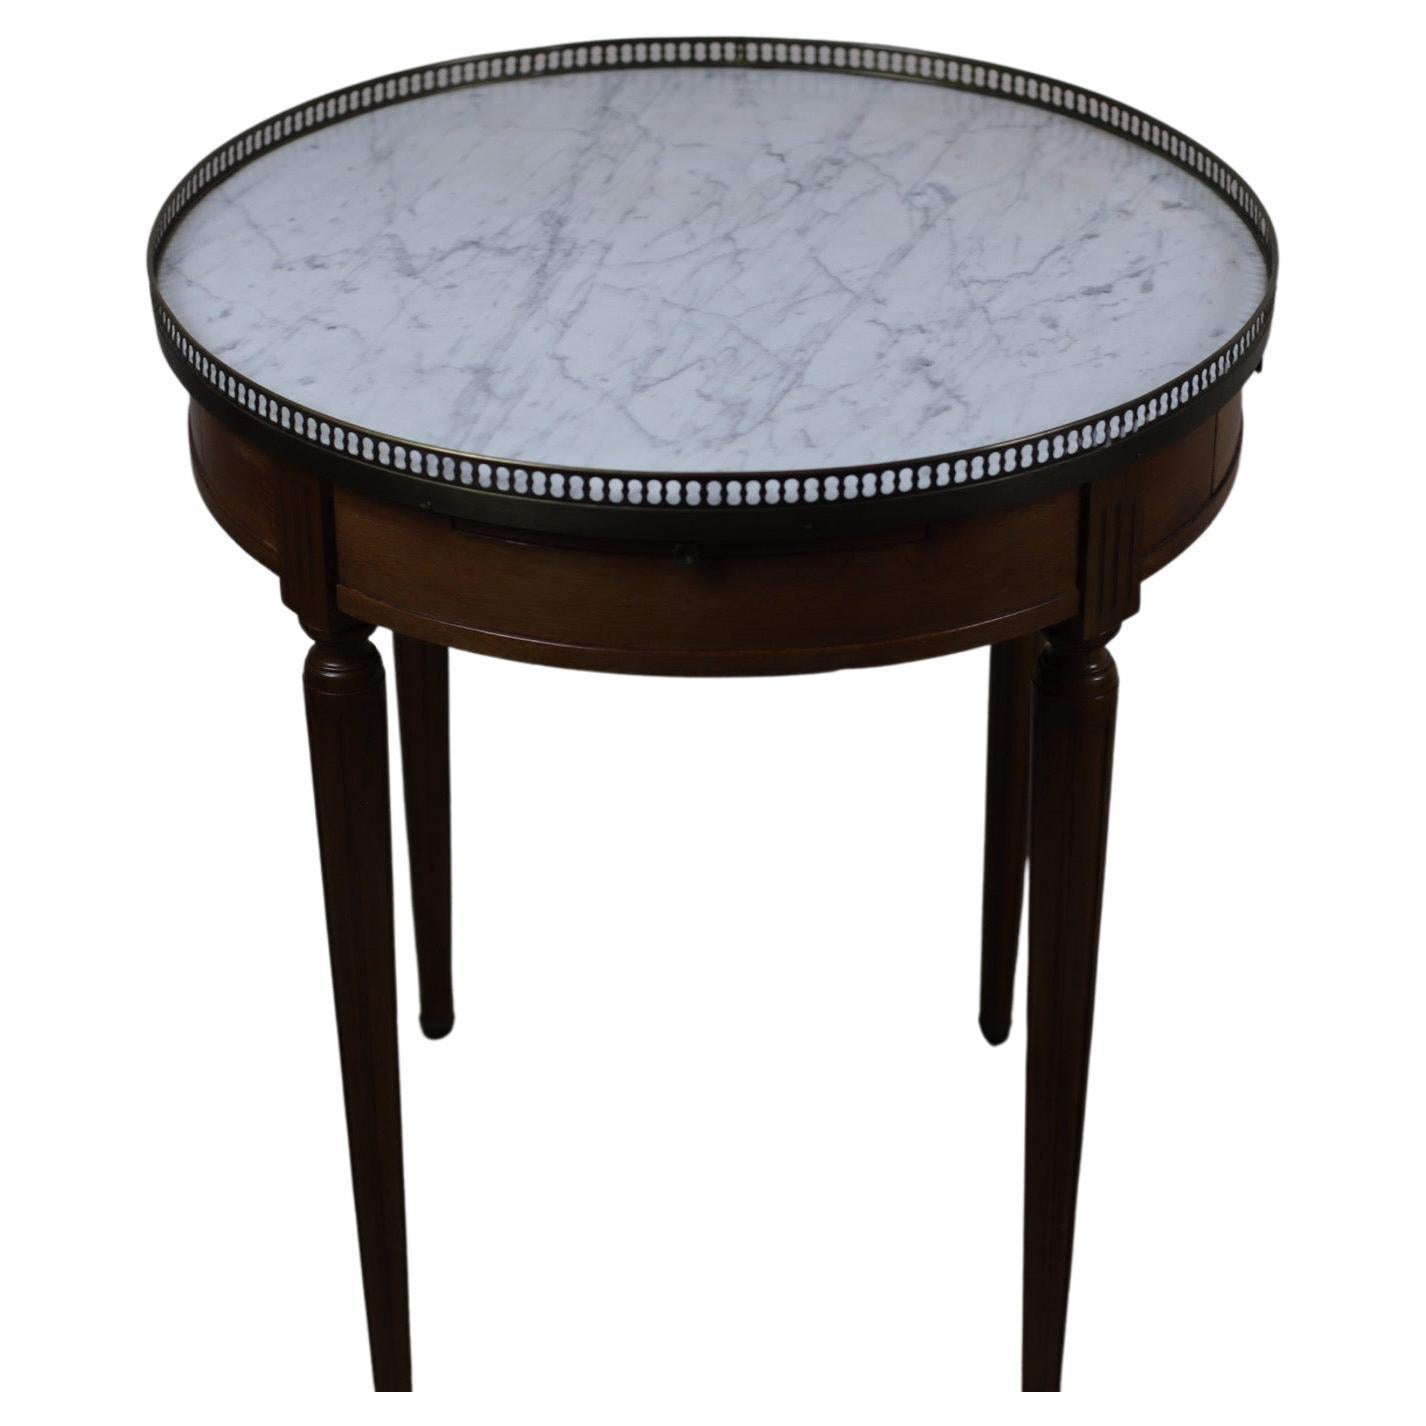 20th Century French Walnut White Marble-Topped Guéridon Centre Table For Sale